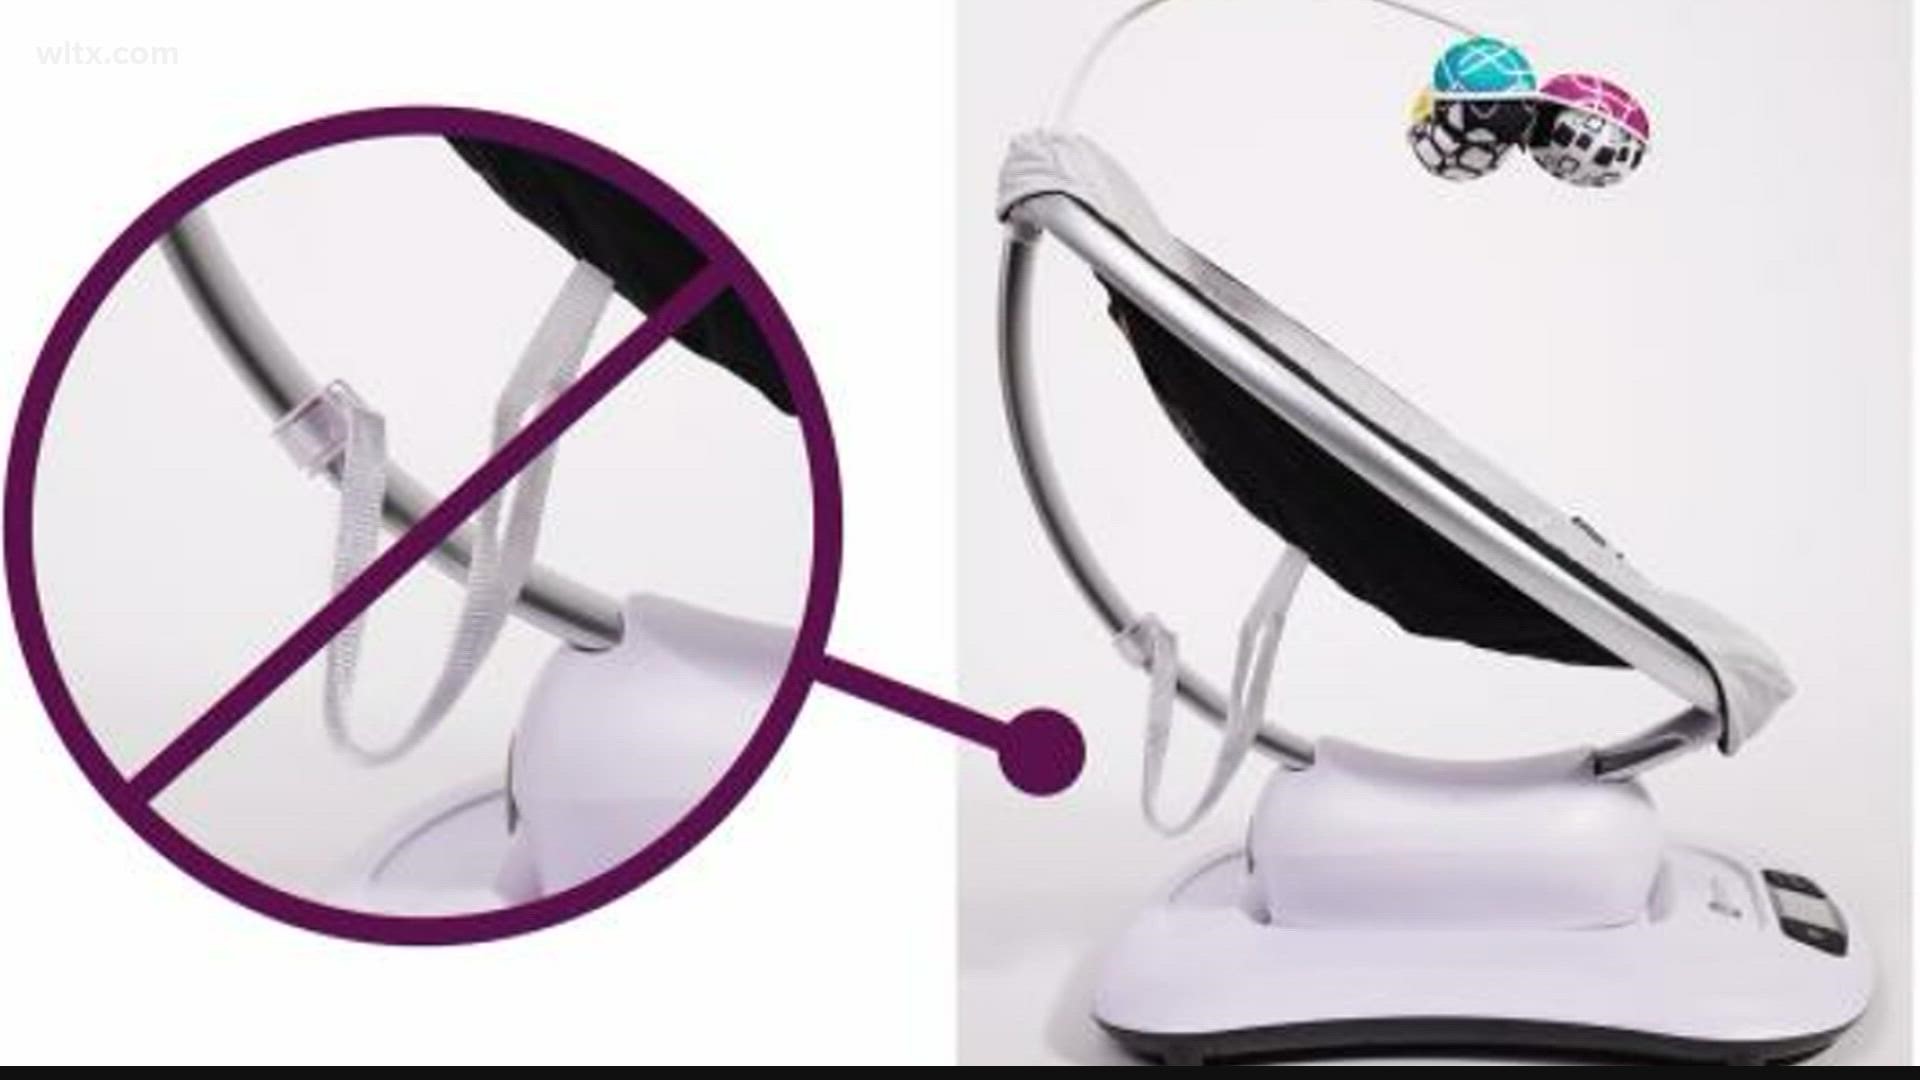 Pittsburgh-based 4moms is recalling about two million MamaRoo swings and 220,000 RockaRoo rockers in the U.S, the Consumer Product Safety Commission said Monday.